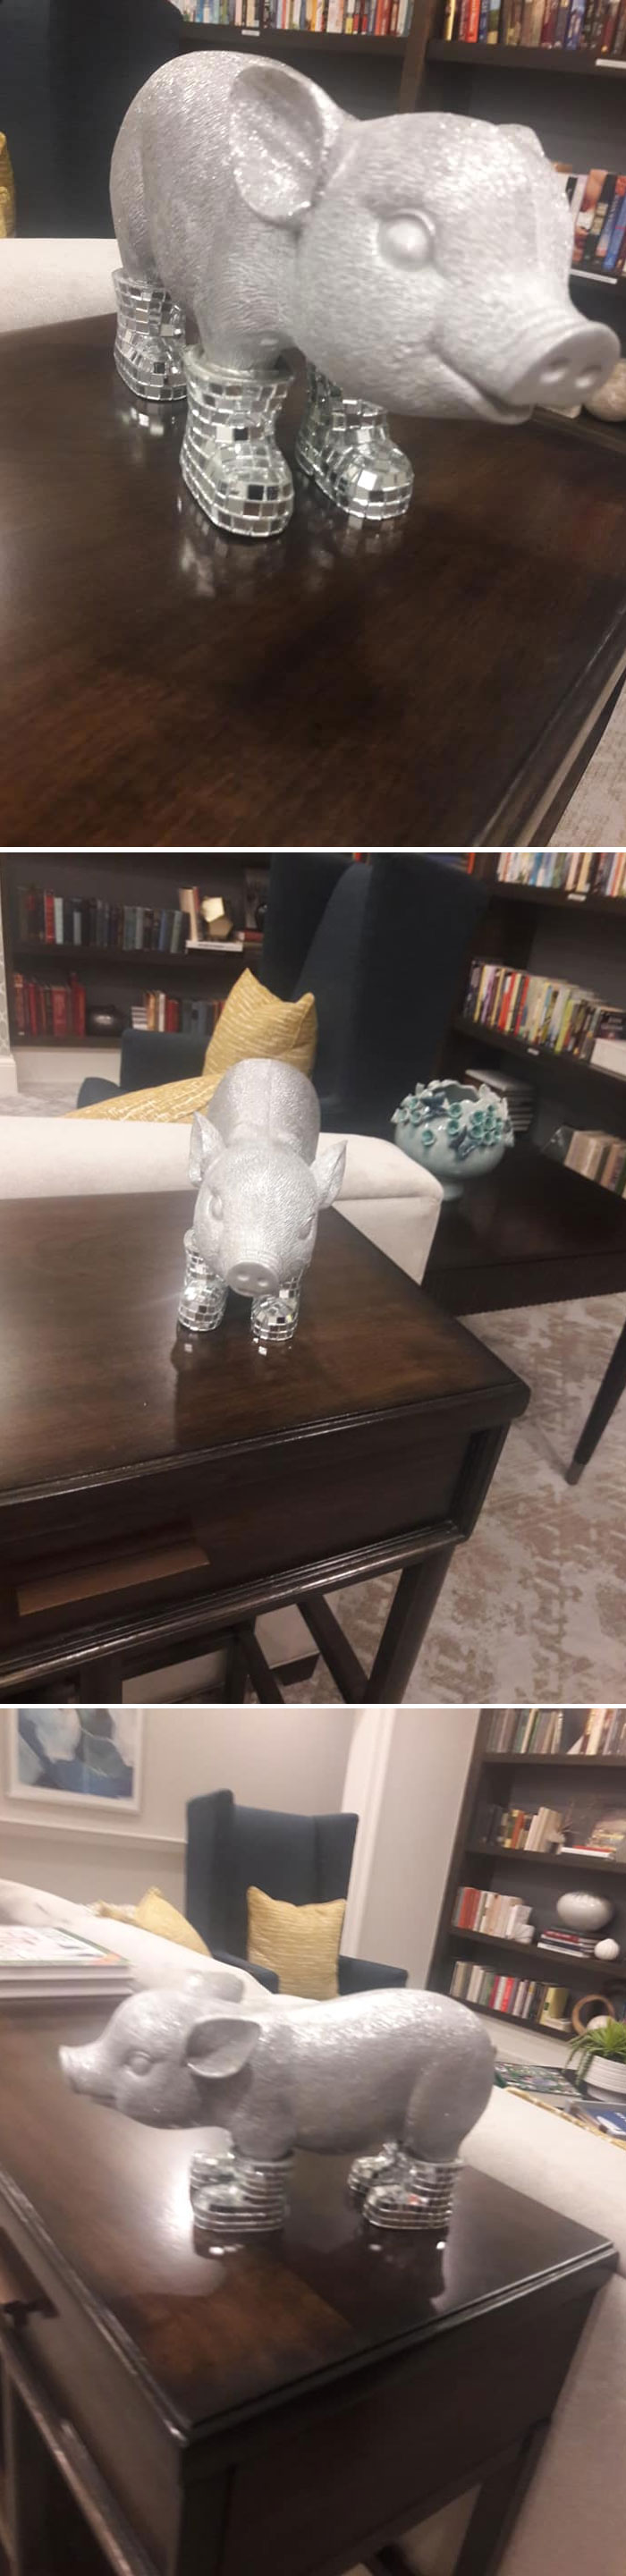 I Present To You.... Disco Pig! Found This Little Guy Hanging Out In The Library At My Grandmother's Retirement Home. Provided By One Of The Residence